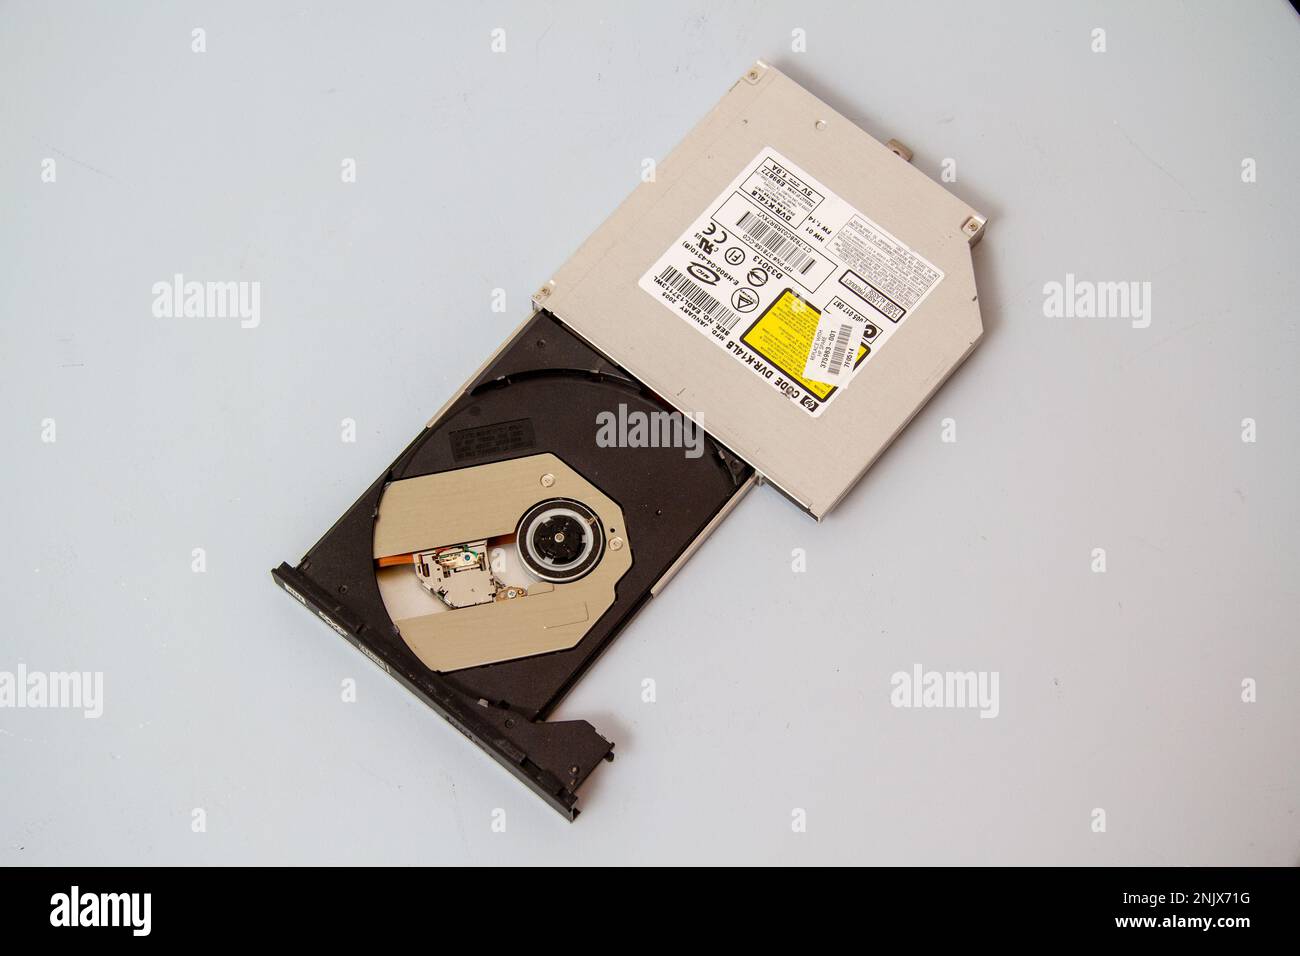 From a Hewlett Packard laptop a R/RW Compact Disc drive Stock Photo